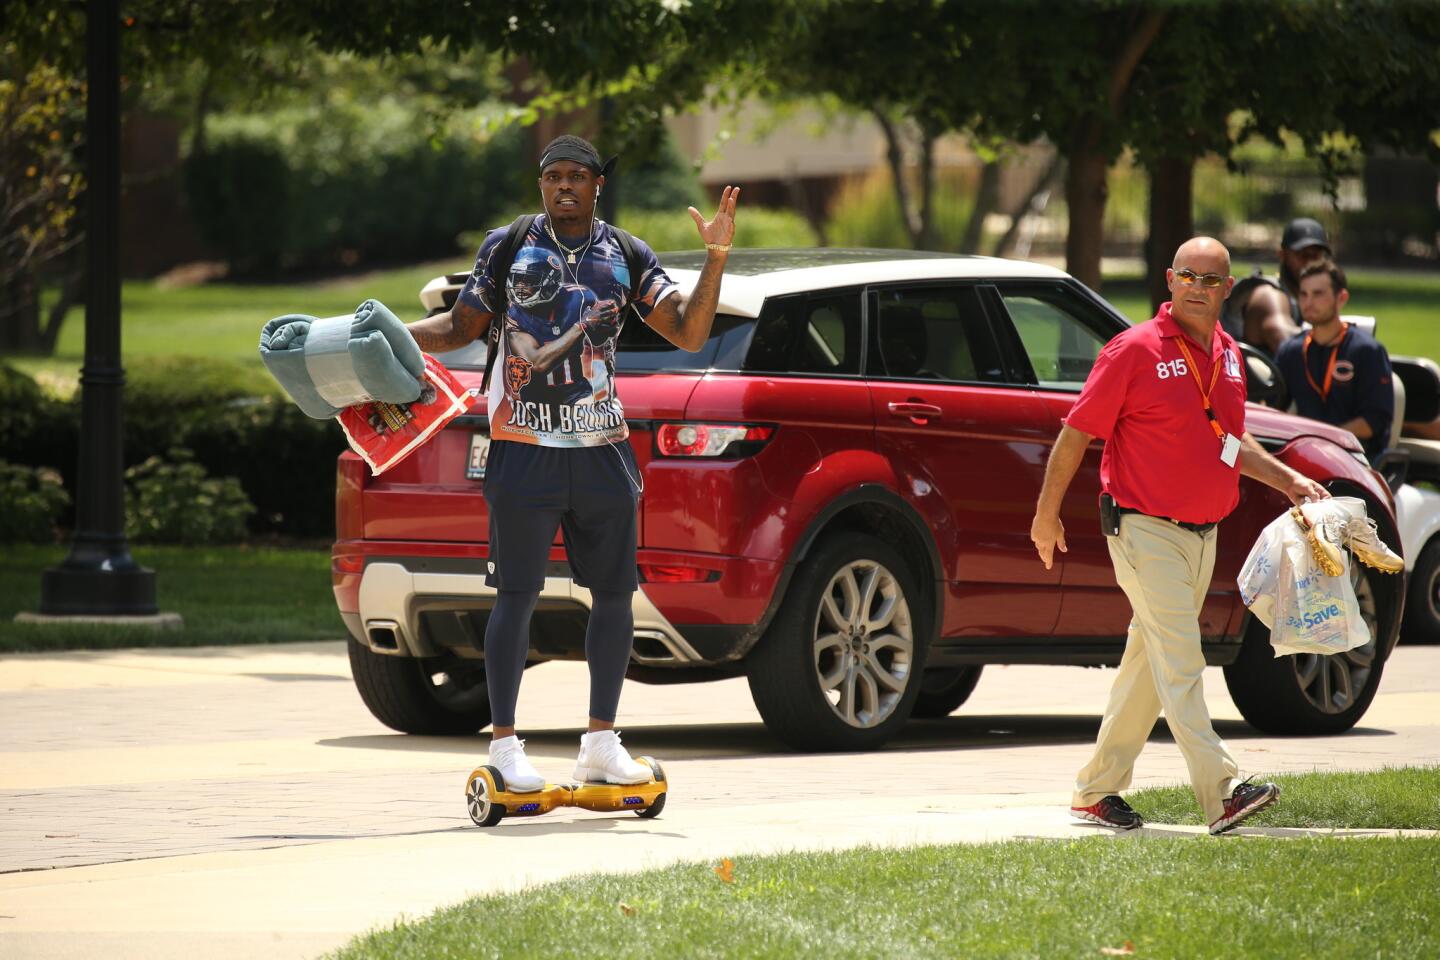 Bears wide receiver Josh Bellamy arrives for training camp on his hoverboard (and his likeness on his t-shirt).